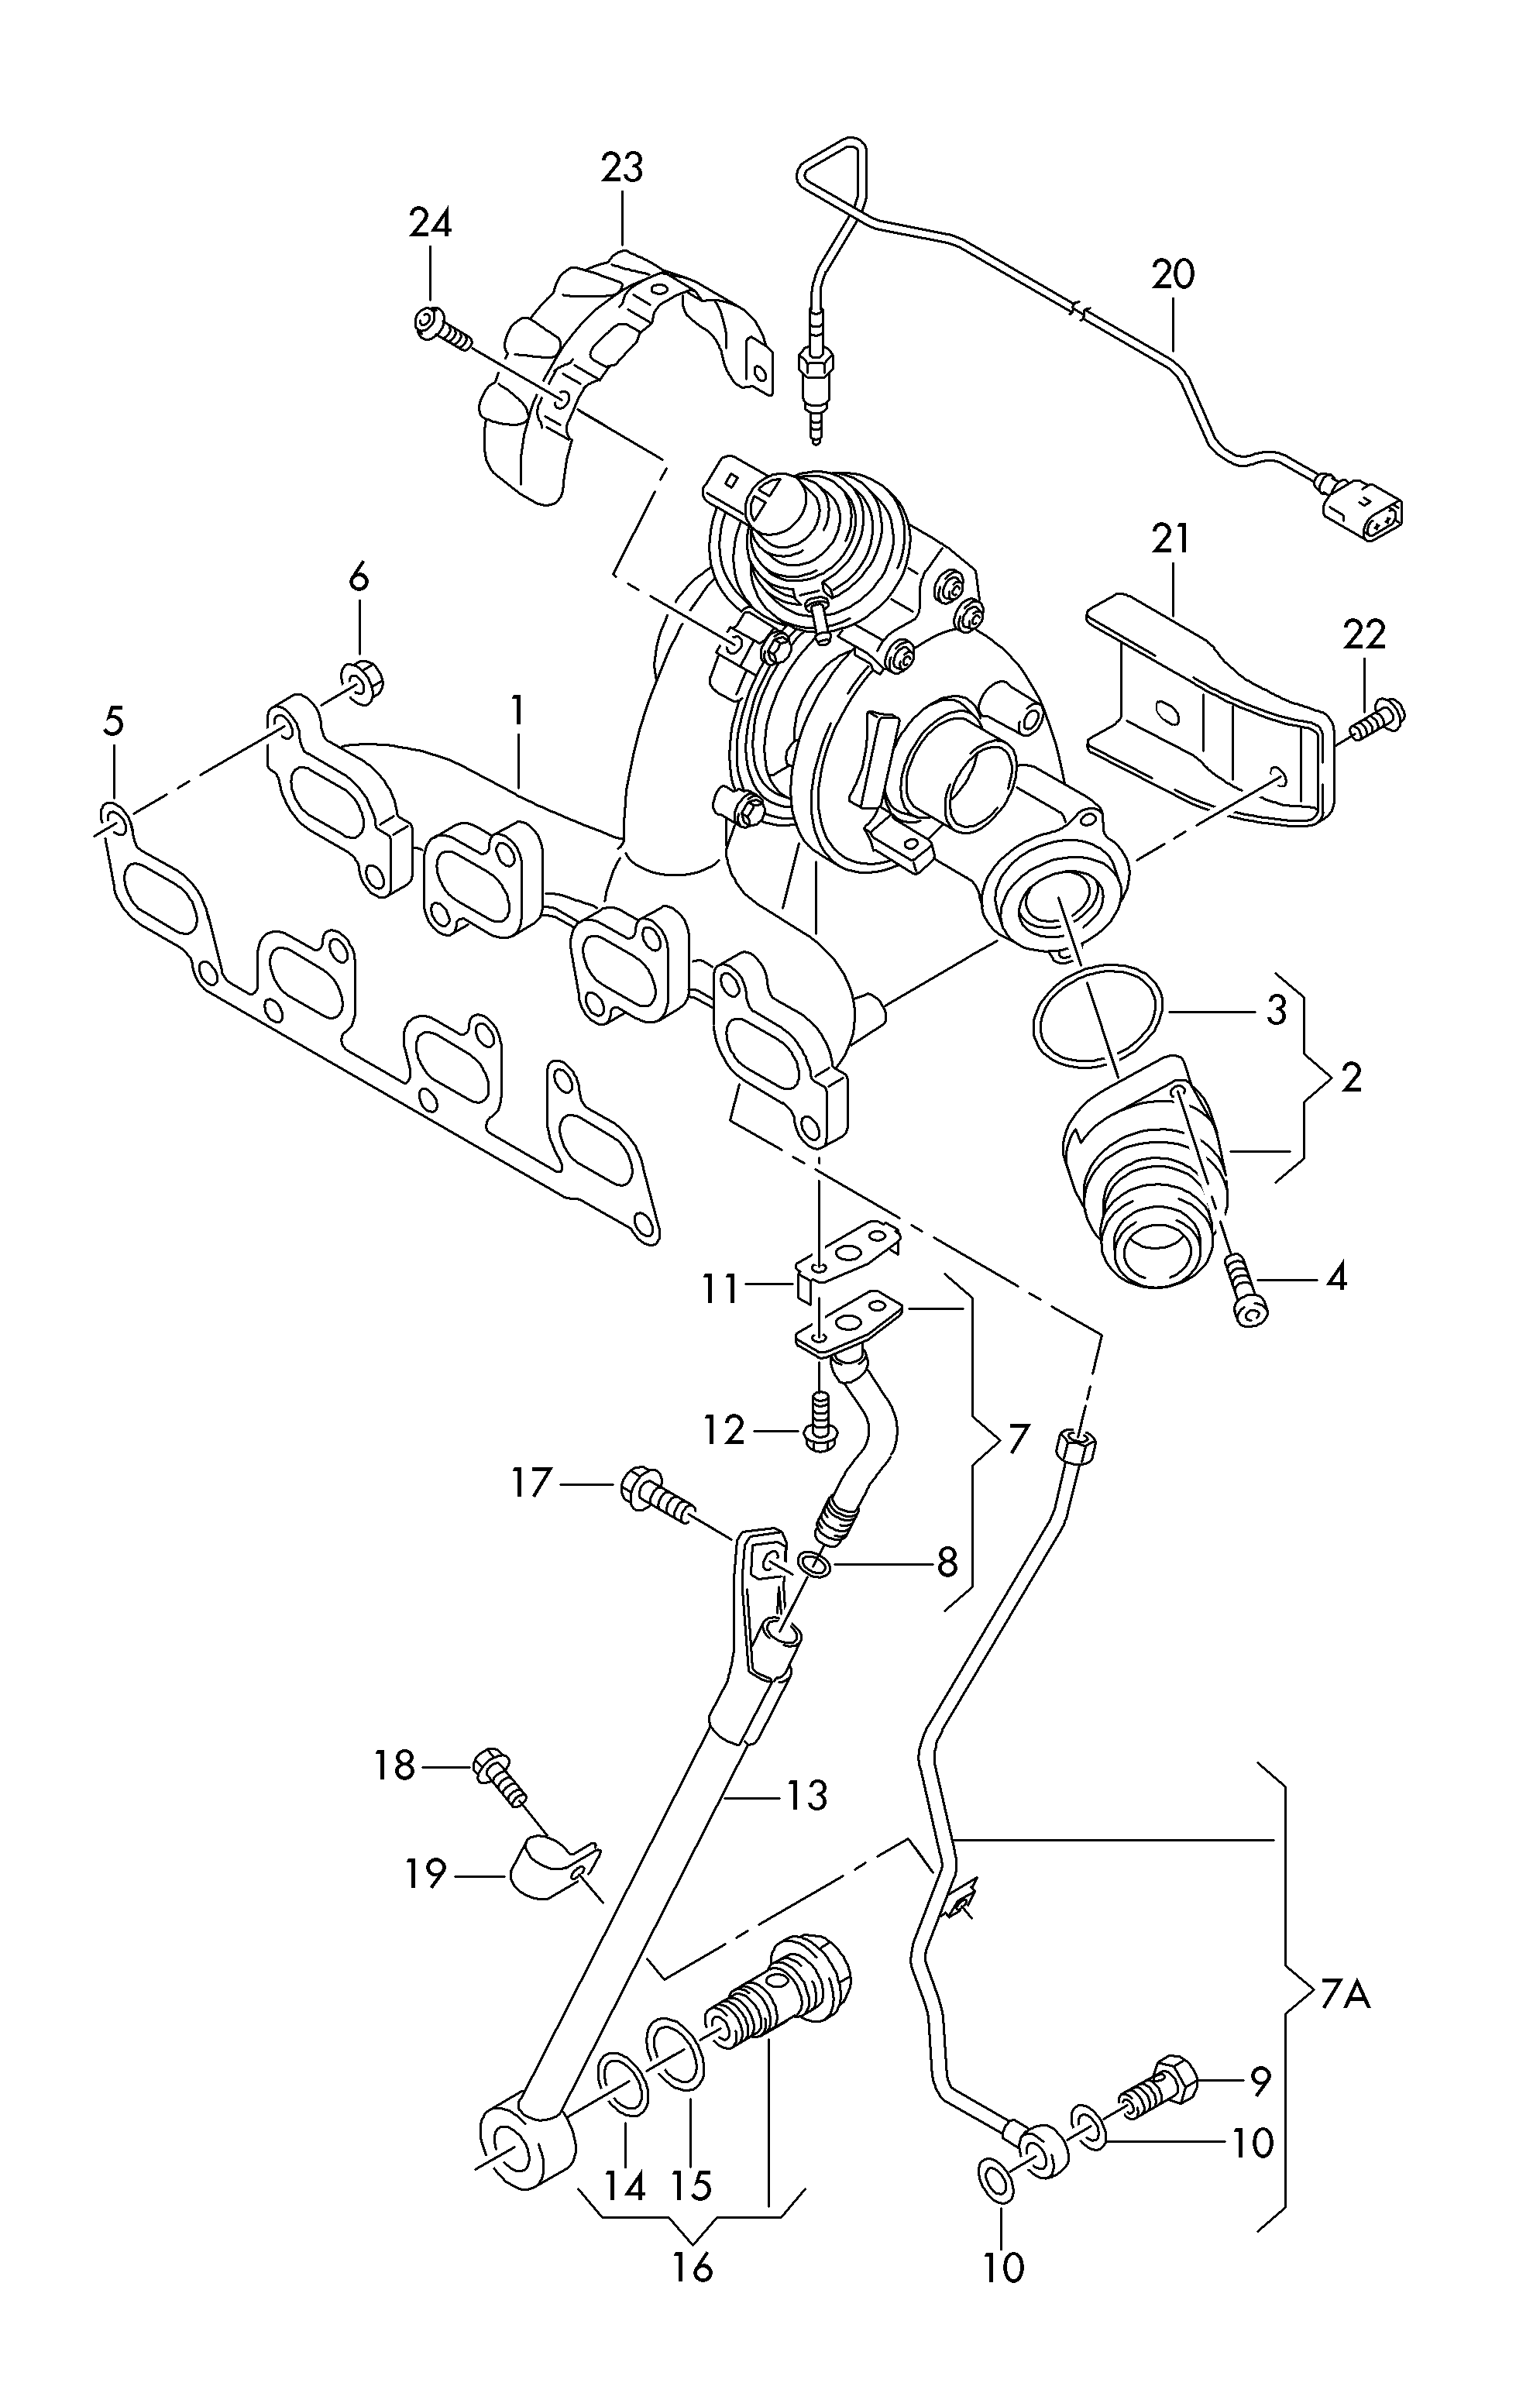 Exhaust manifold with turbo-<br>charger 2.0 Ltr. - Caddy - cad